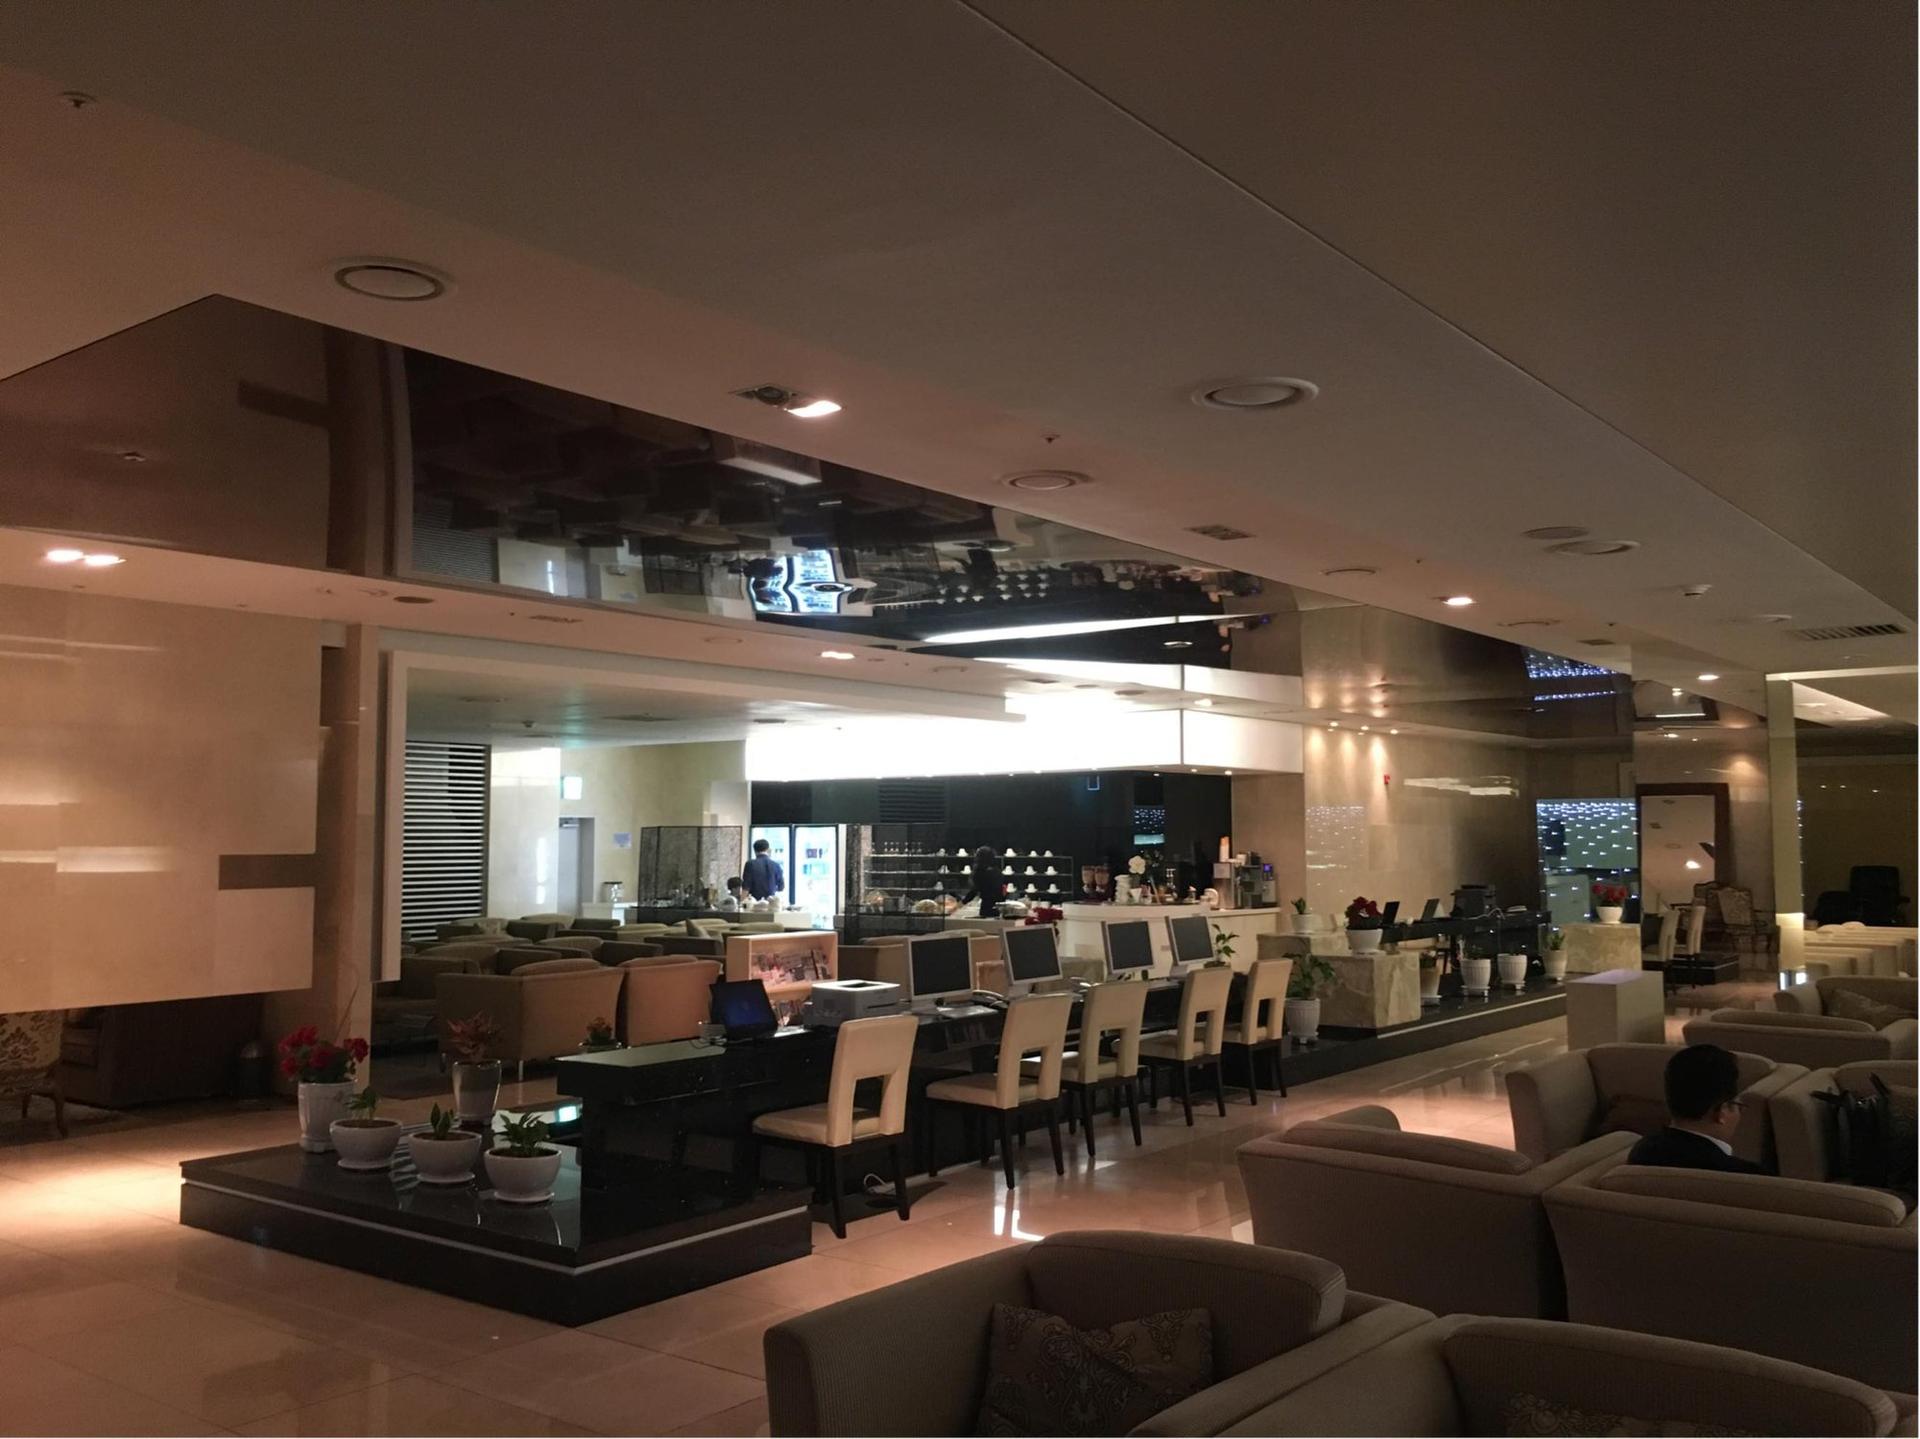 China Eastern/Shanghai Airlines VIP Lounge image 1 of 3